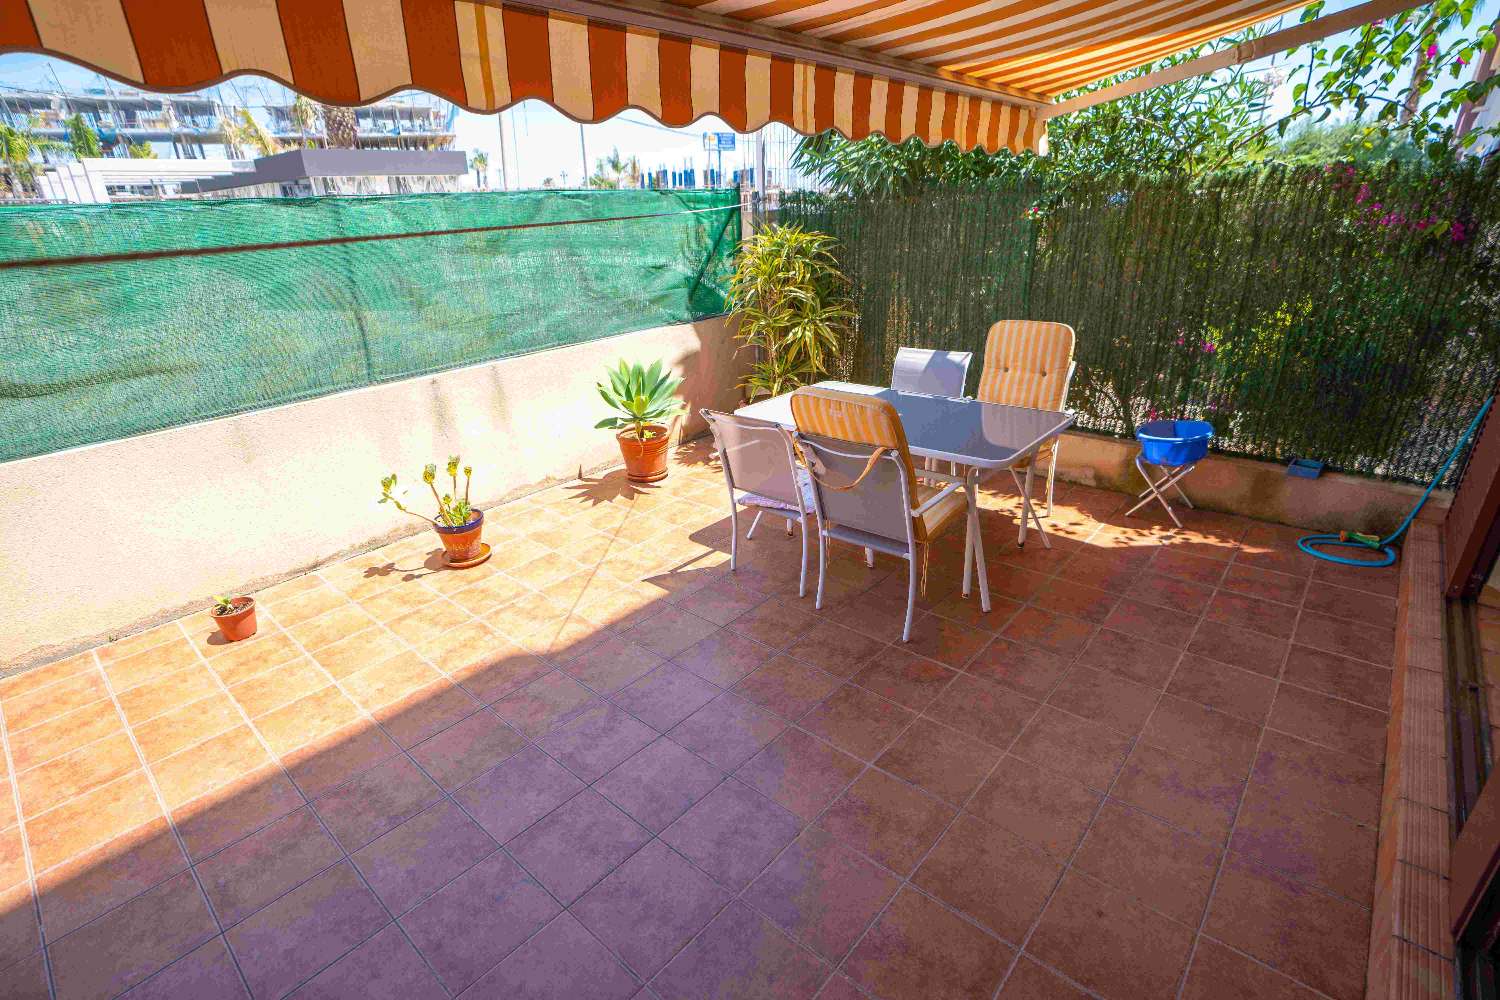 GROUND FLOOR APARTMENT IN RESD. GATED WITH GARAGE SPACE AND STORAGE ROOM IN PLAYA FLAMENCA